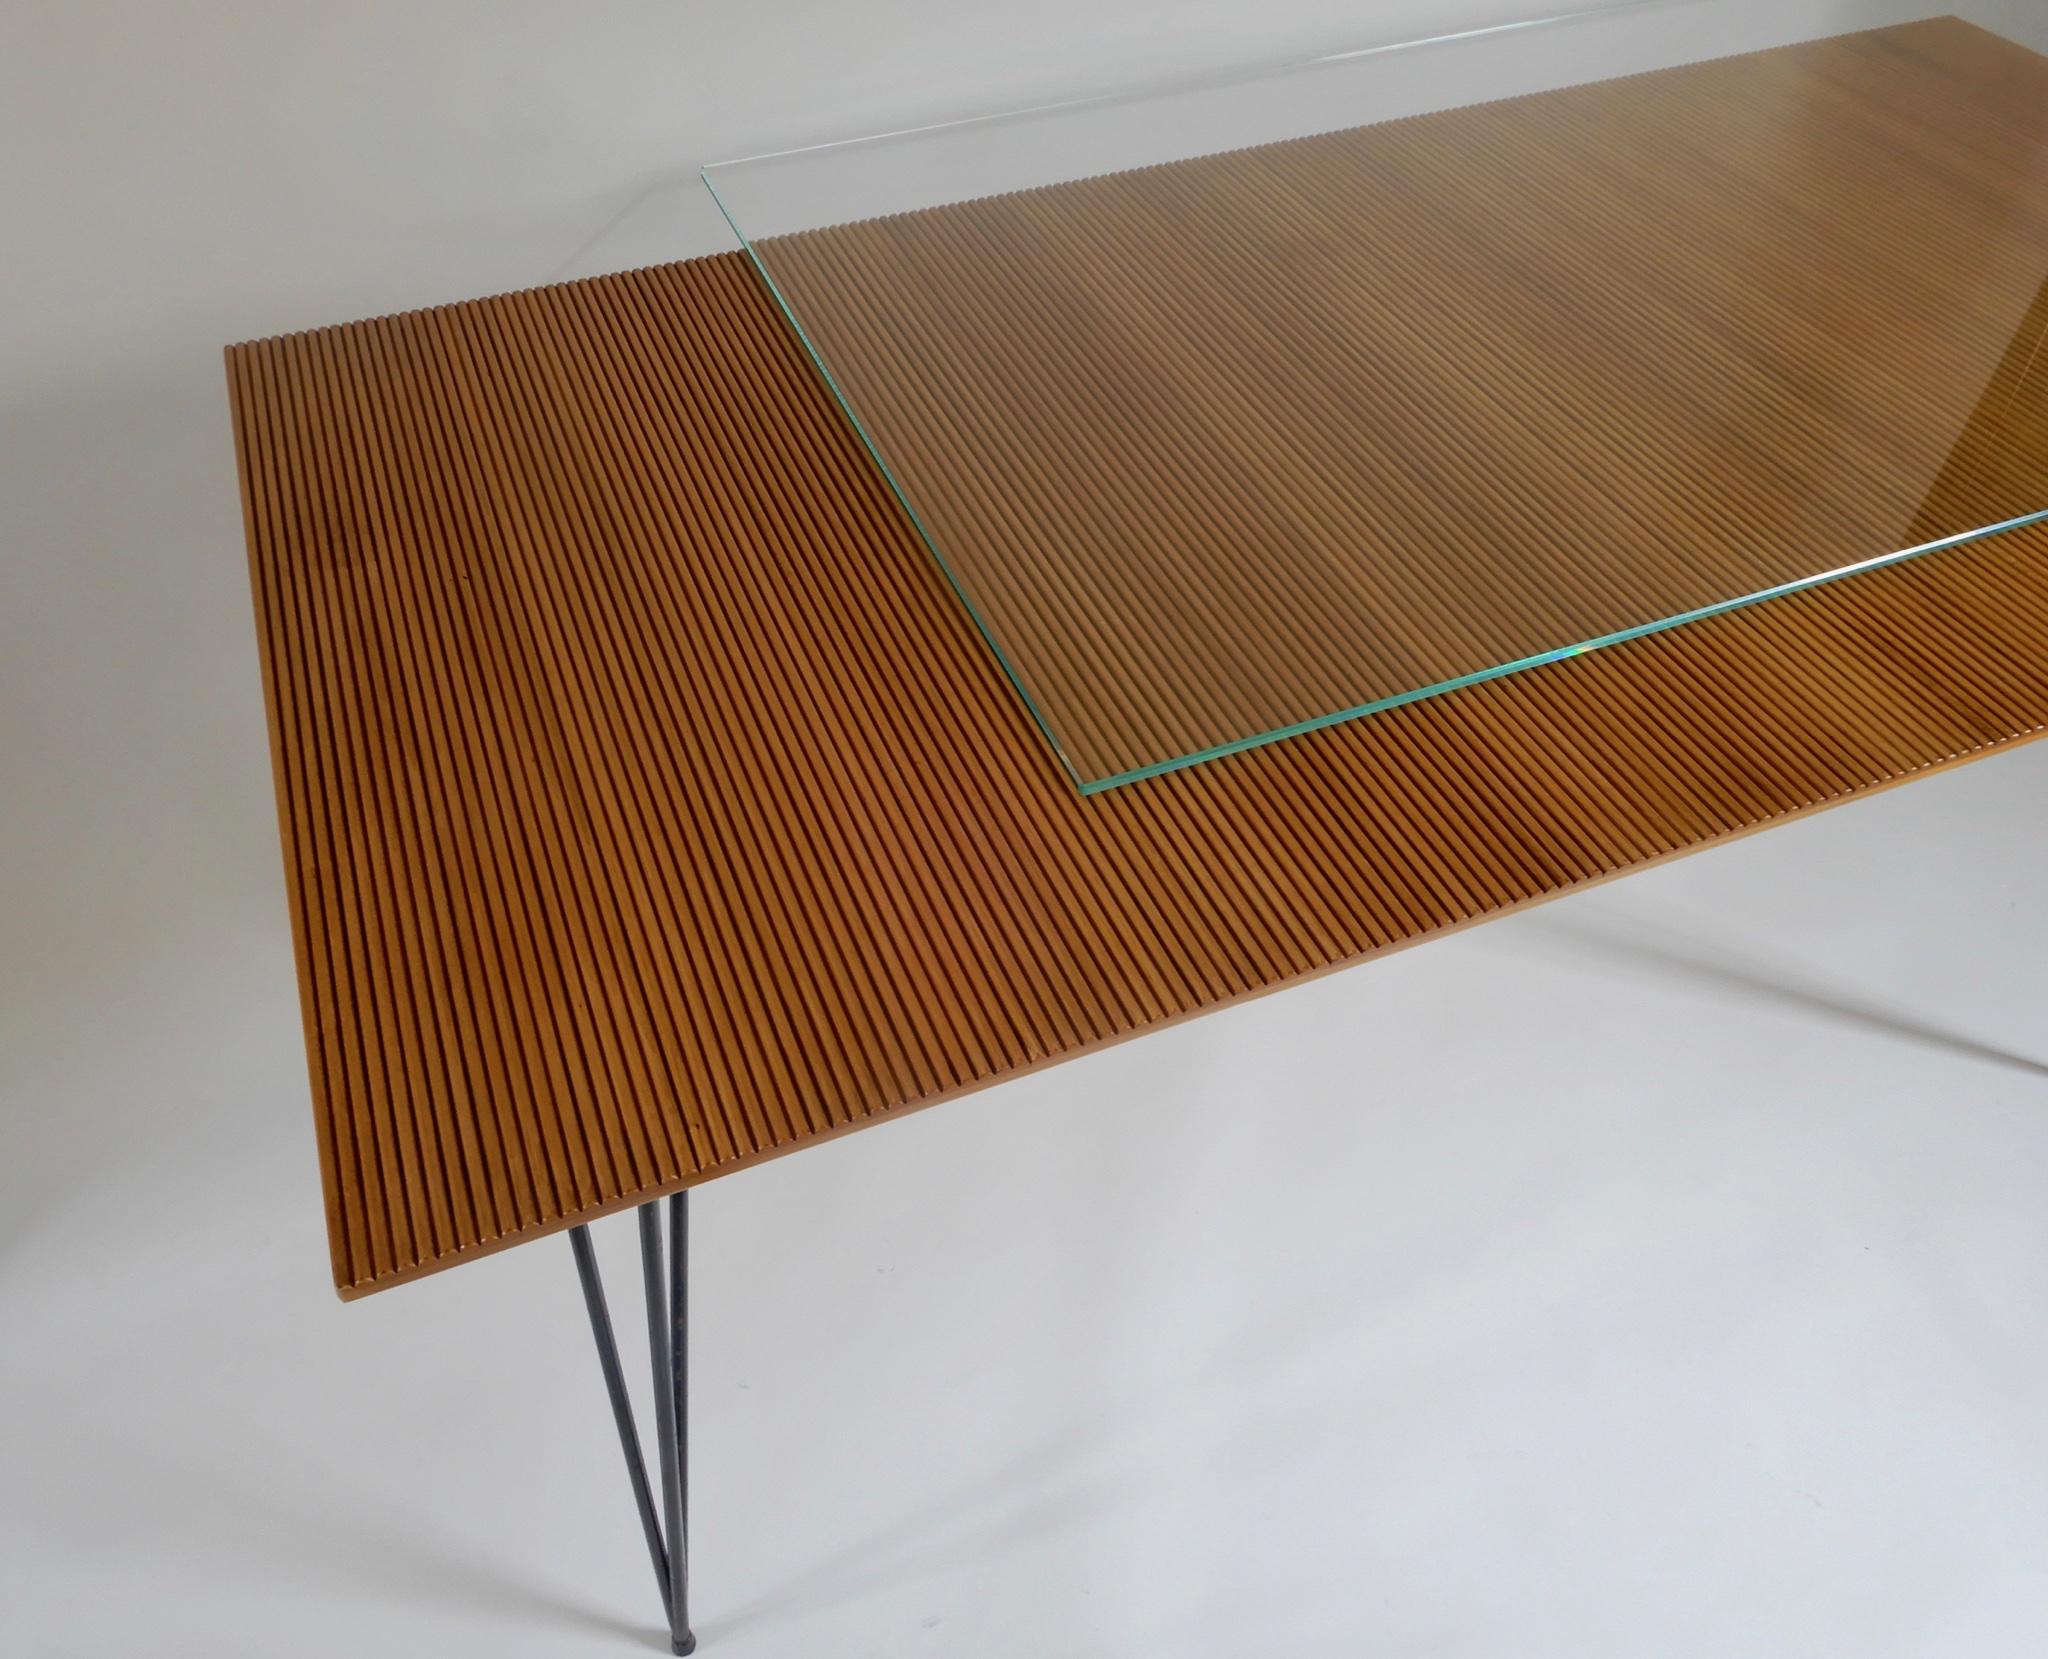 Minimalist Italian Desk/ Dining Table with Wood Top and Black Metal Legs, 1950s